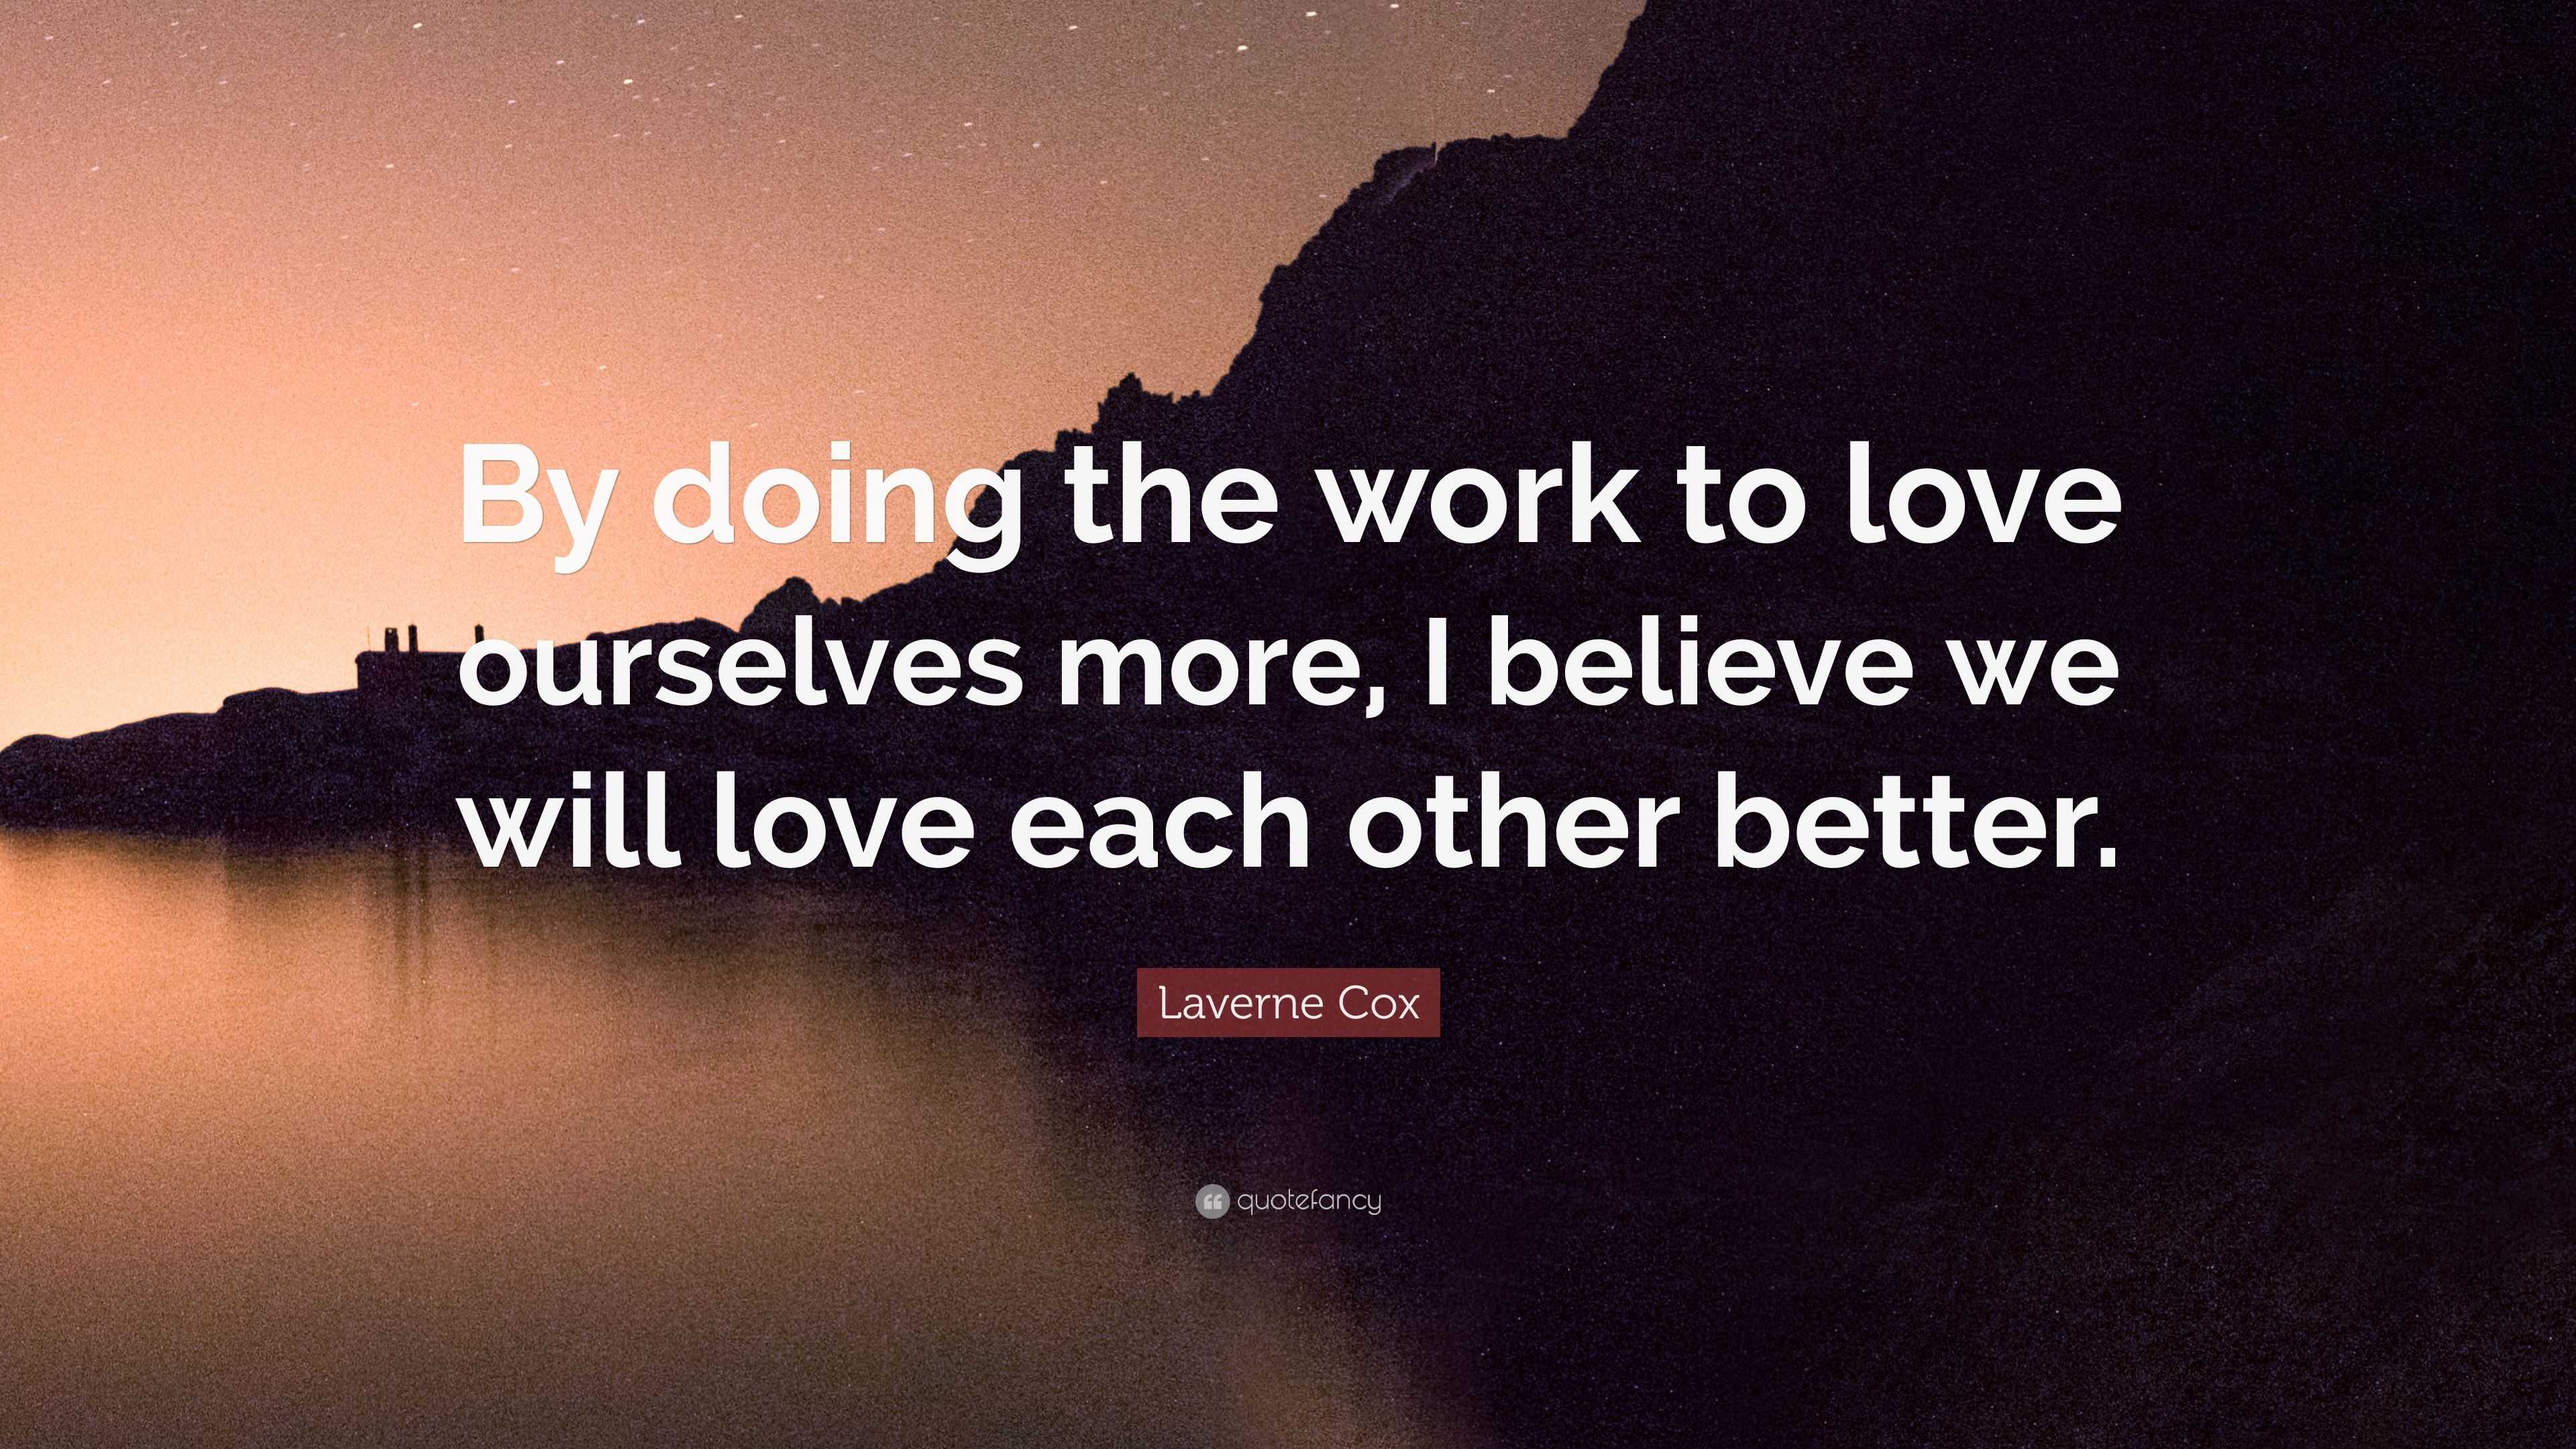 Laverne Cox Quote: "By doing the work to love ourselves more, I believe we will love each other ...